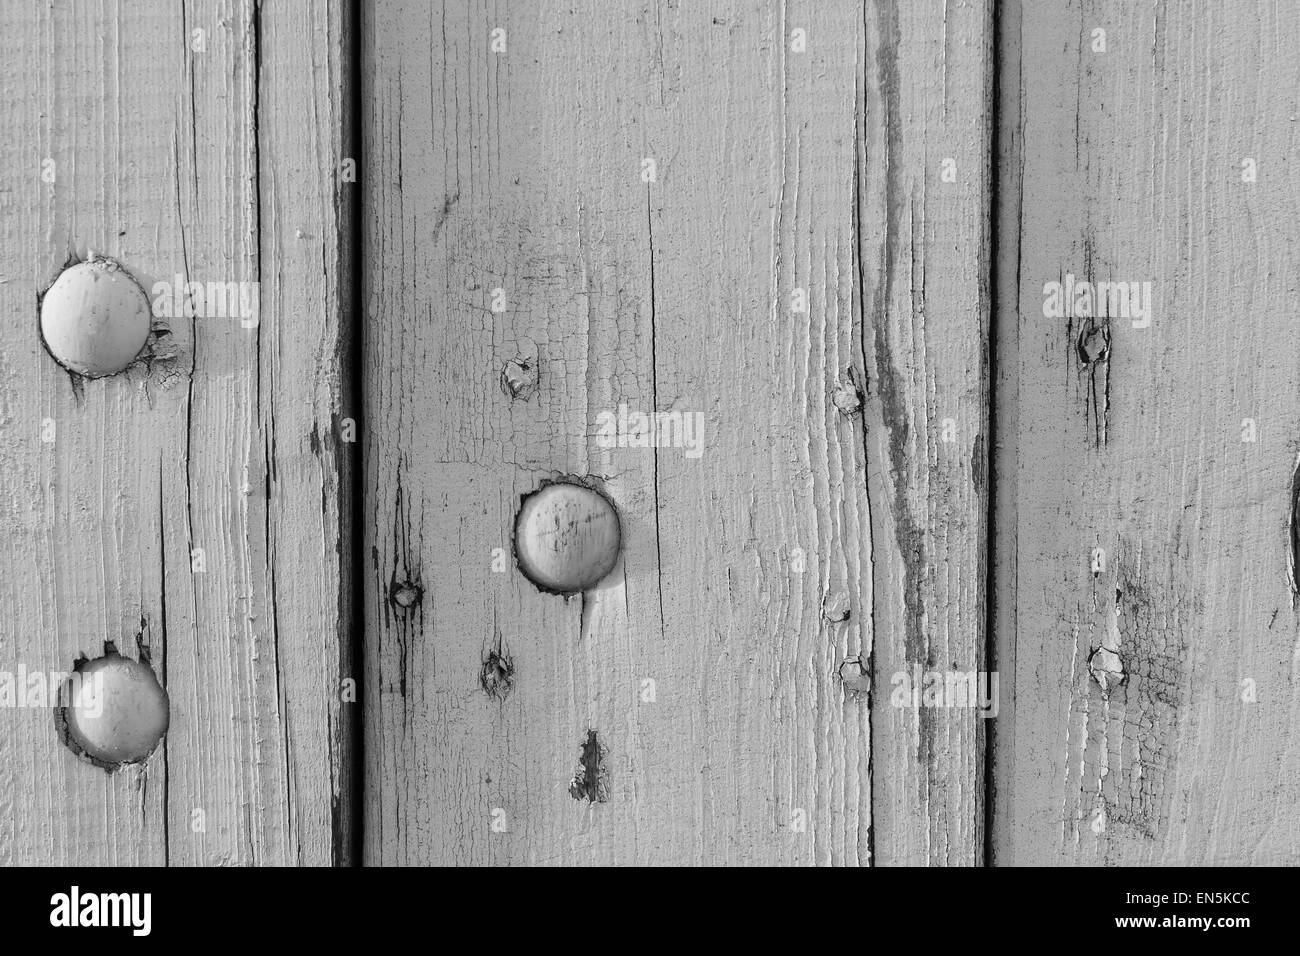 Painted White Wooden Fence Wall Plank Texture Background Closeup Buttons Interesting Stock Photo